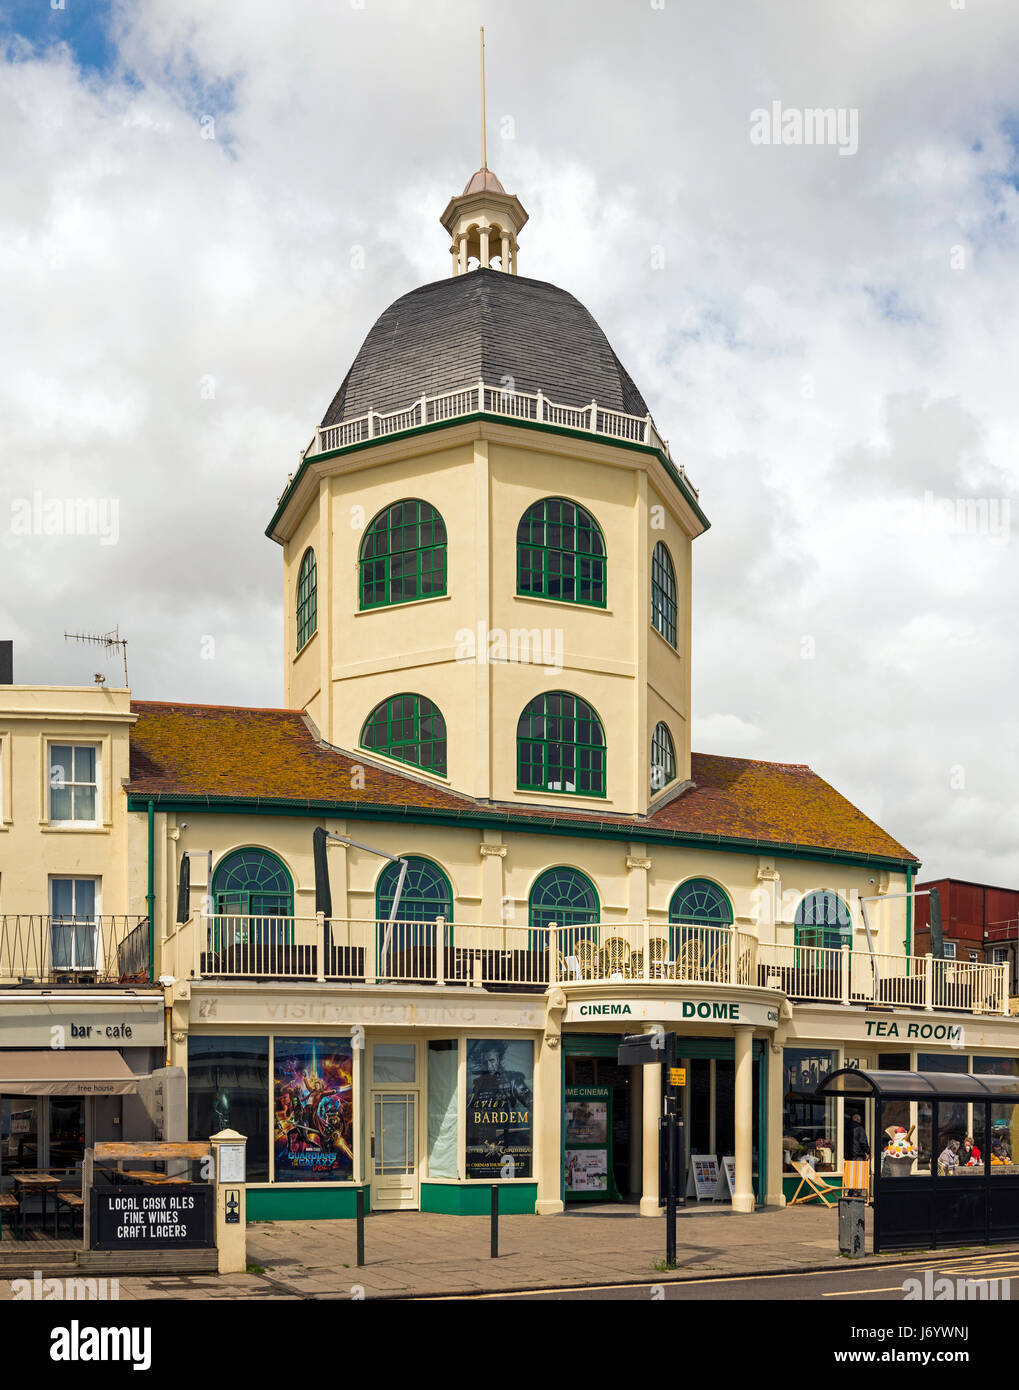 The Dome Cinema, one of the UK's oldest working cinemas, on the seafront, Worthing, West Sussex, UK Stock Photo